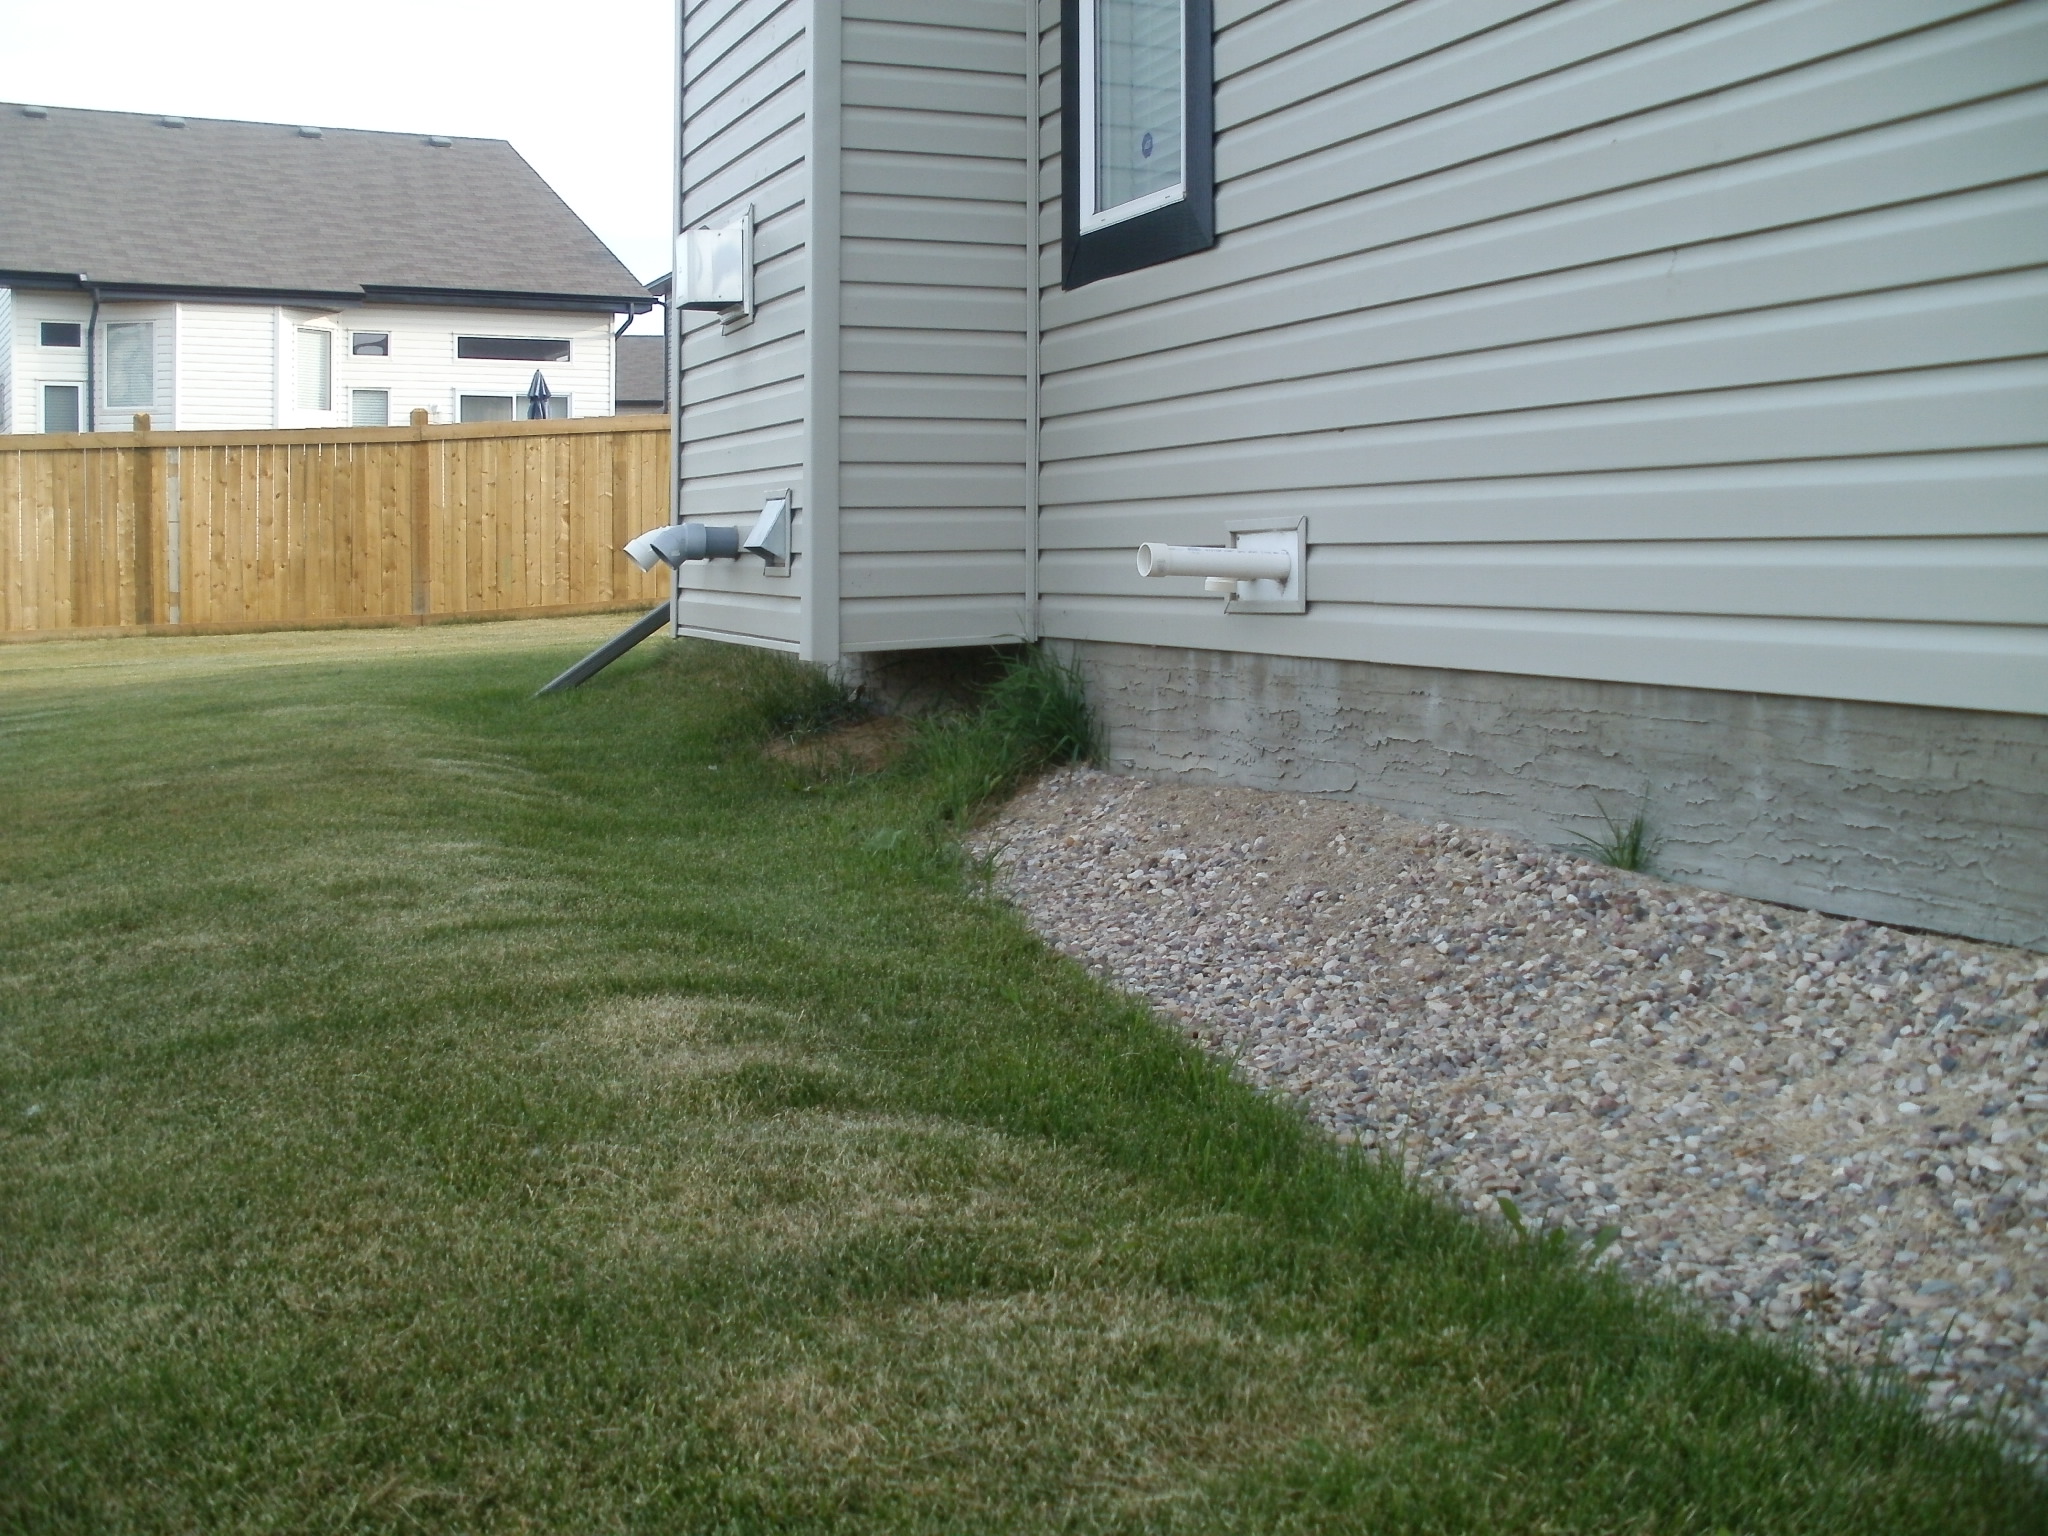 Settlement Creates Negative Grade Towards the Foundation and Can Lead to Drainage Problems